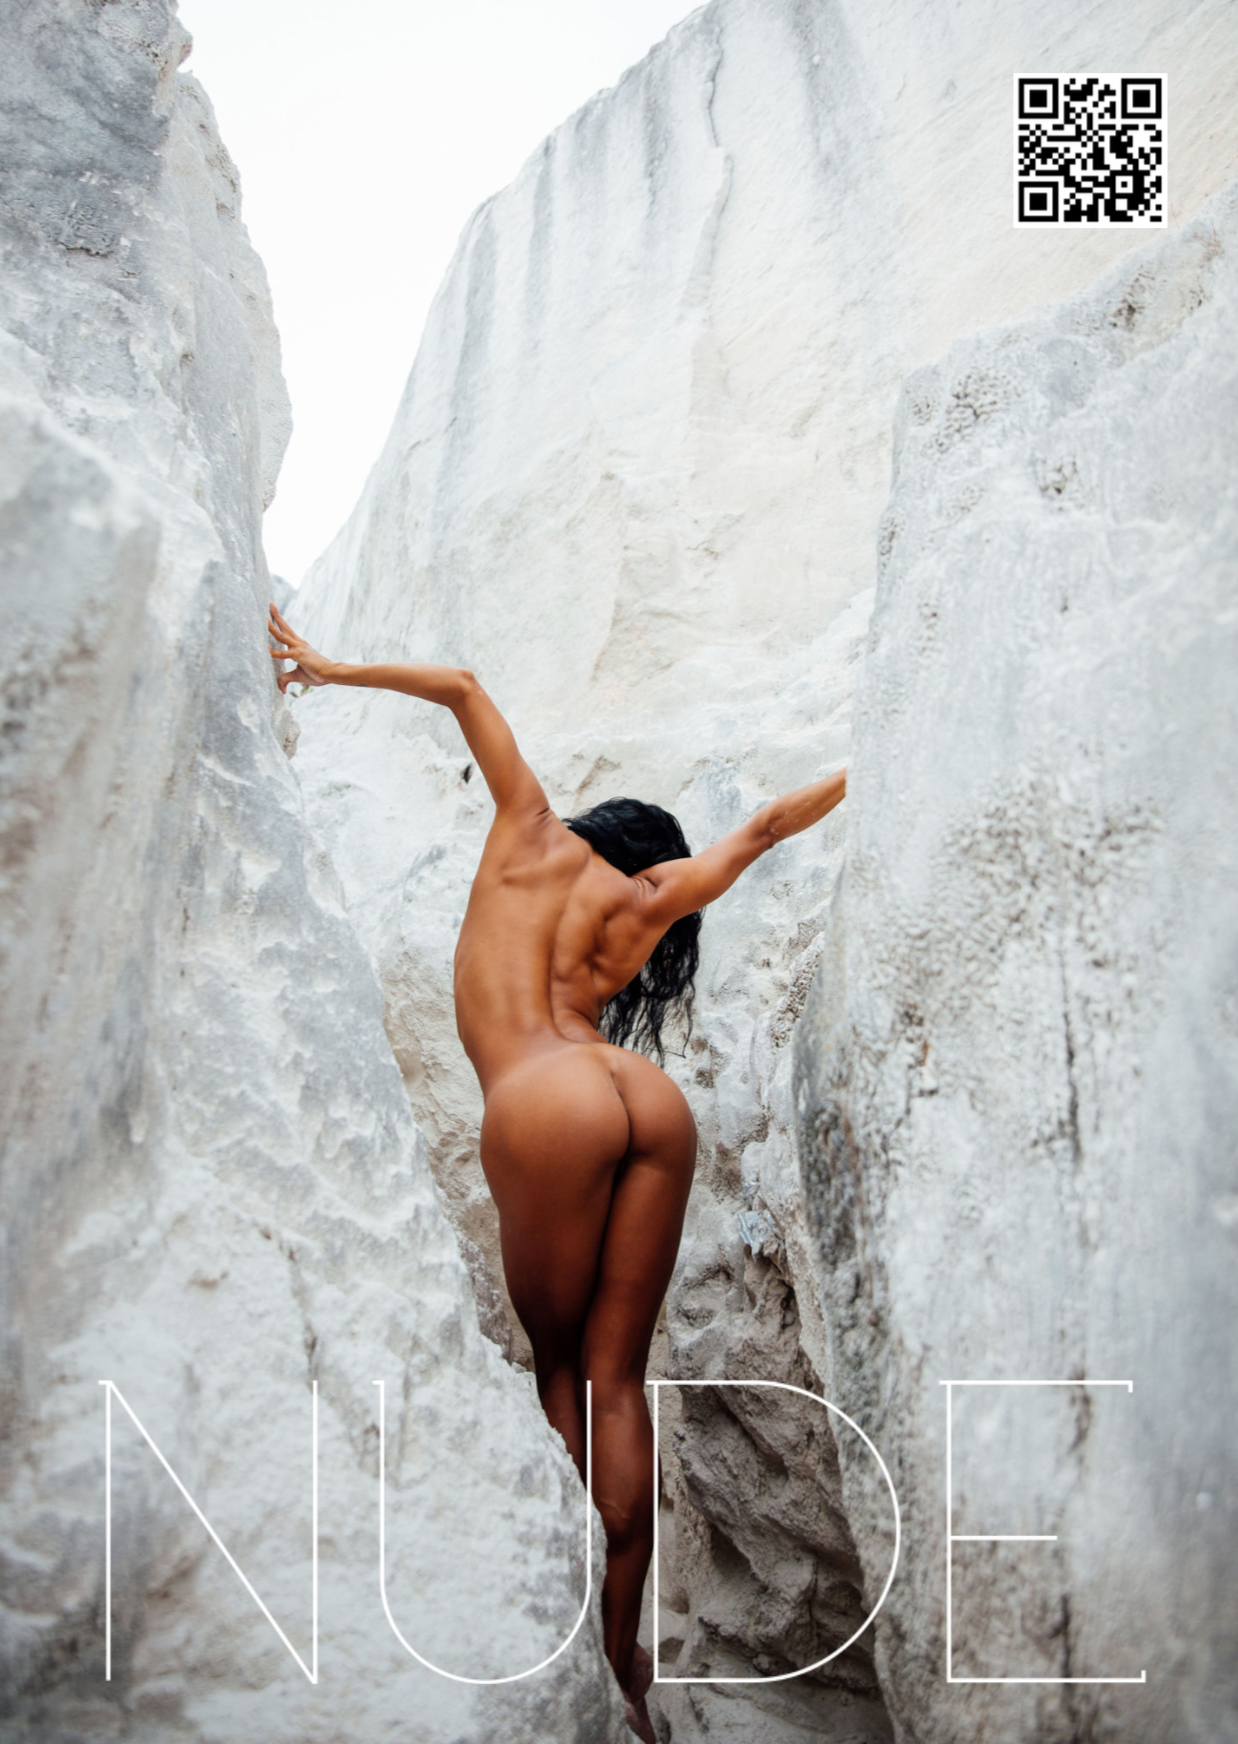 Nude Magazine 19 2020 - Back Cover -Photo by @idzabellla